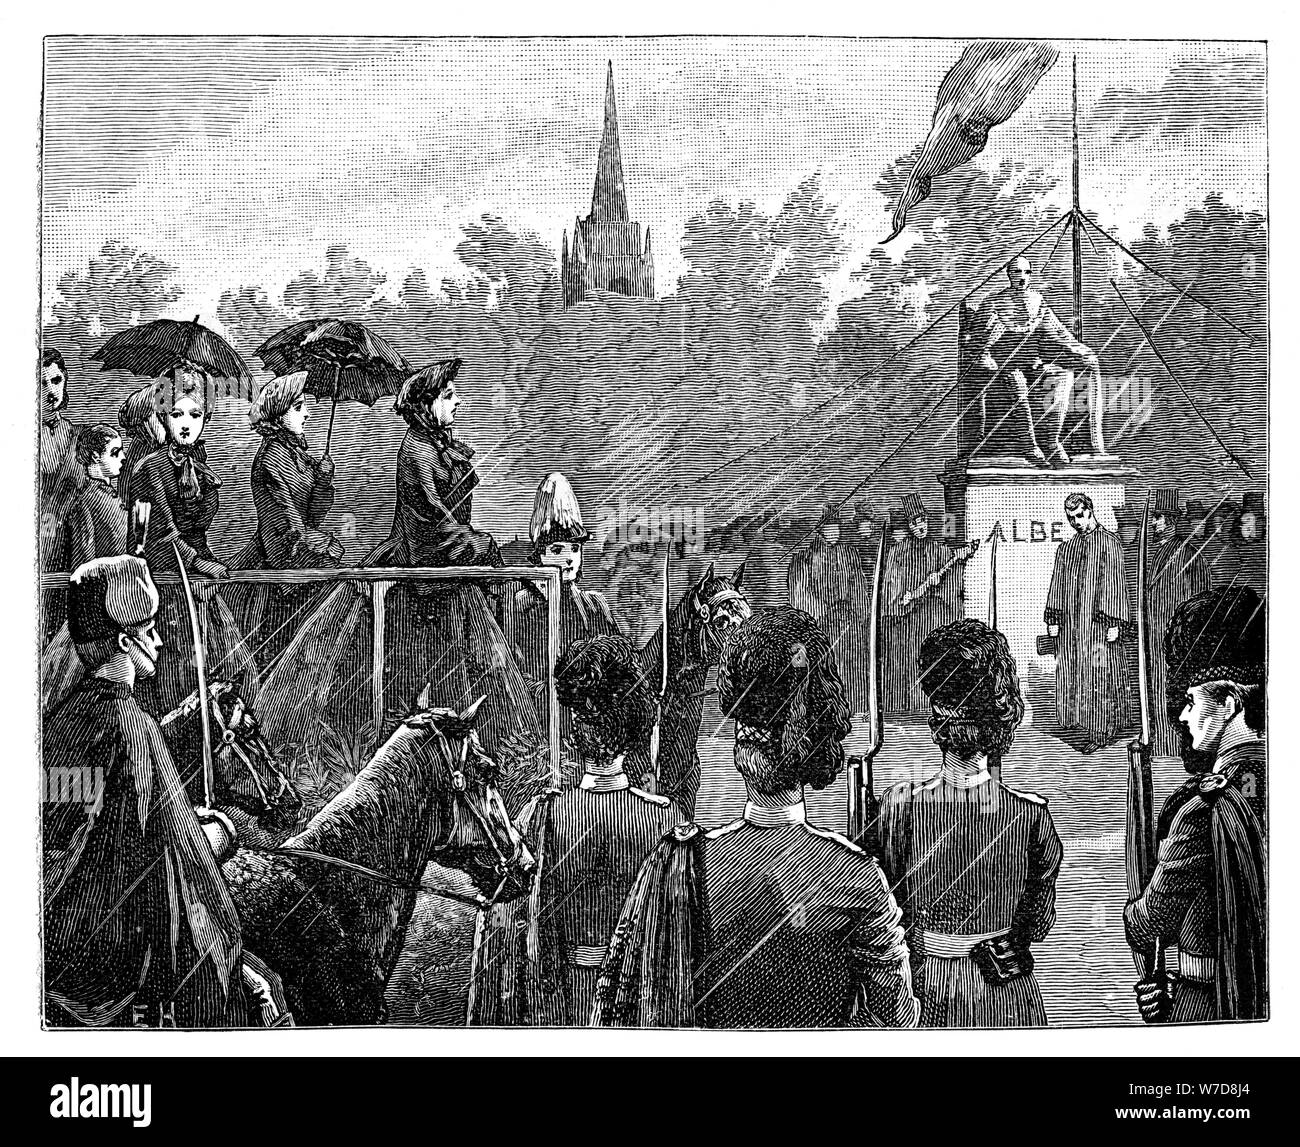 Queen Victoria unveiling the statue of Prince Albert at Aberdeen, 19th century. Artist: Unknown Stock Photo